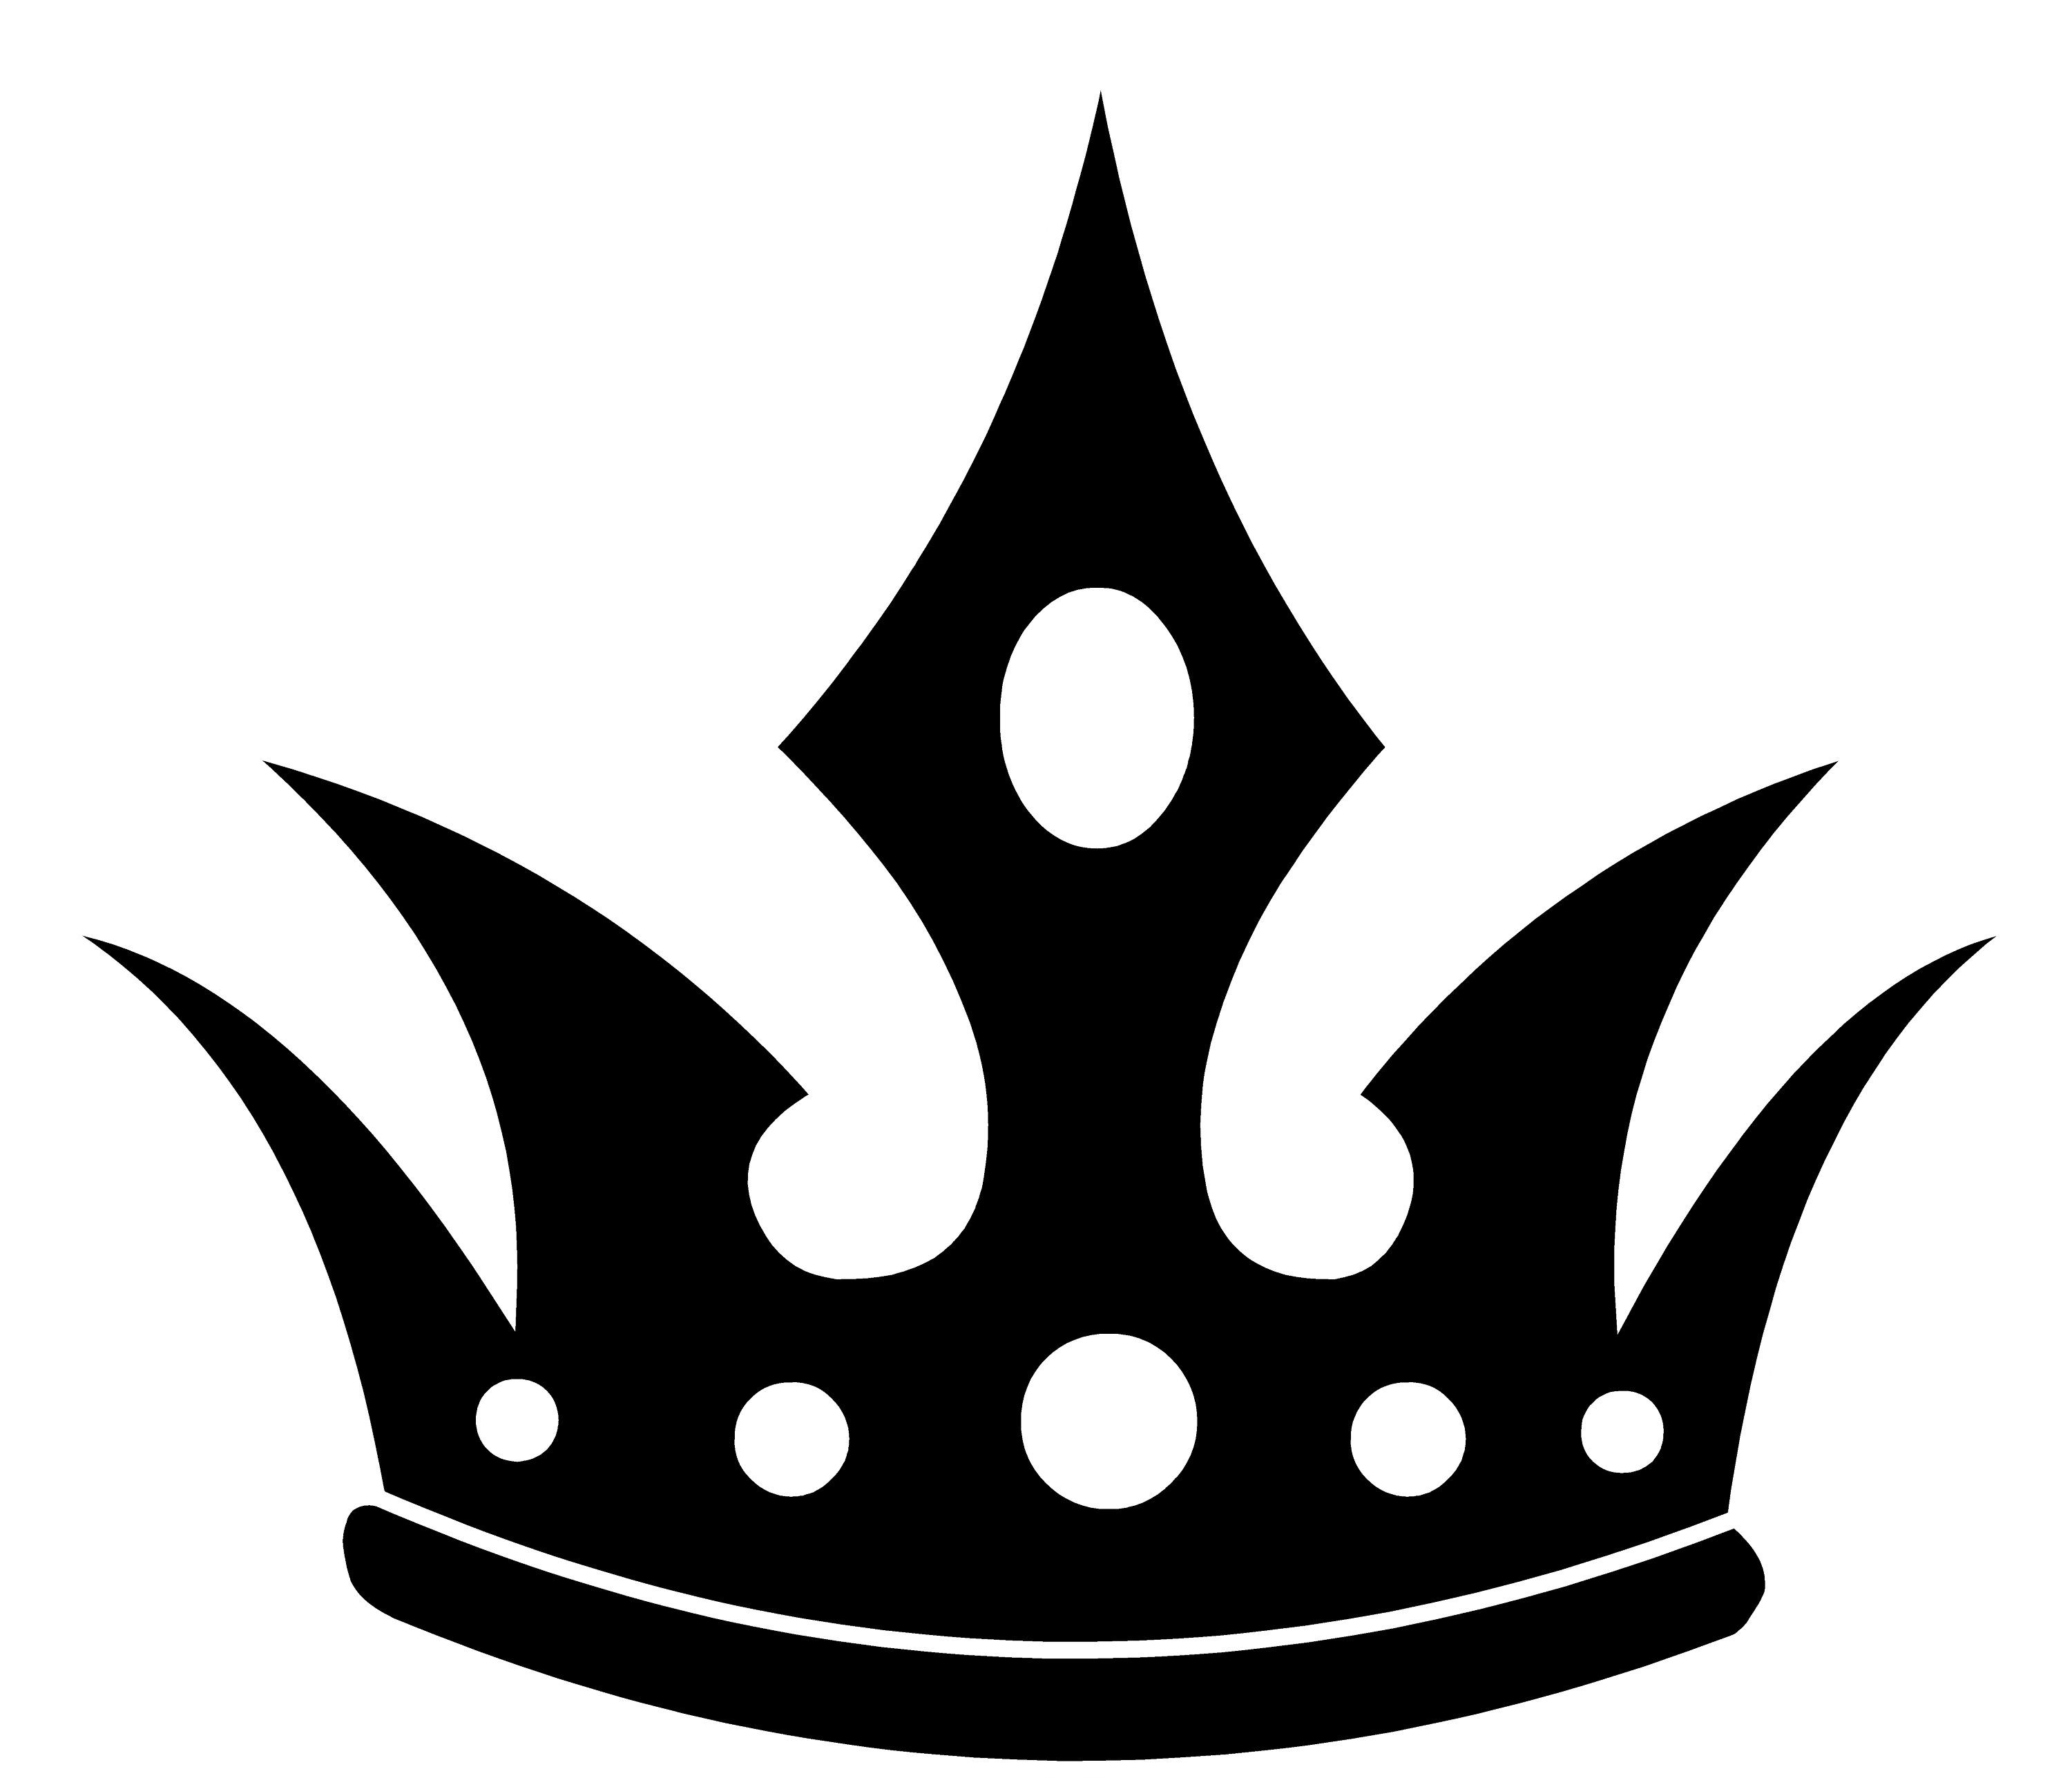 Download Pointed Black Crown Silhouette - Free Clip Art